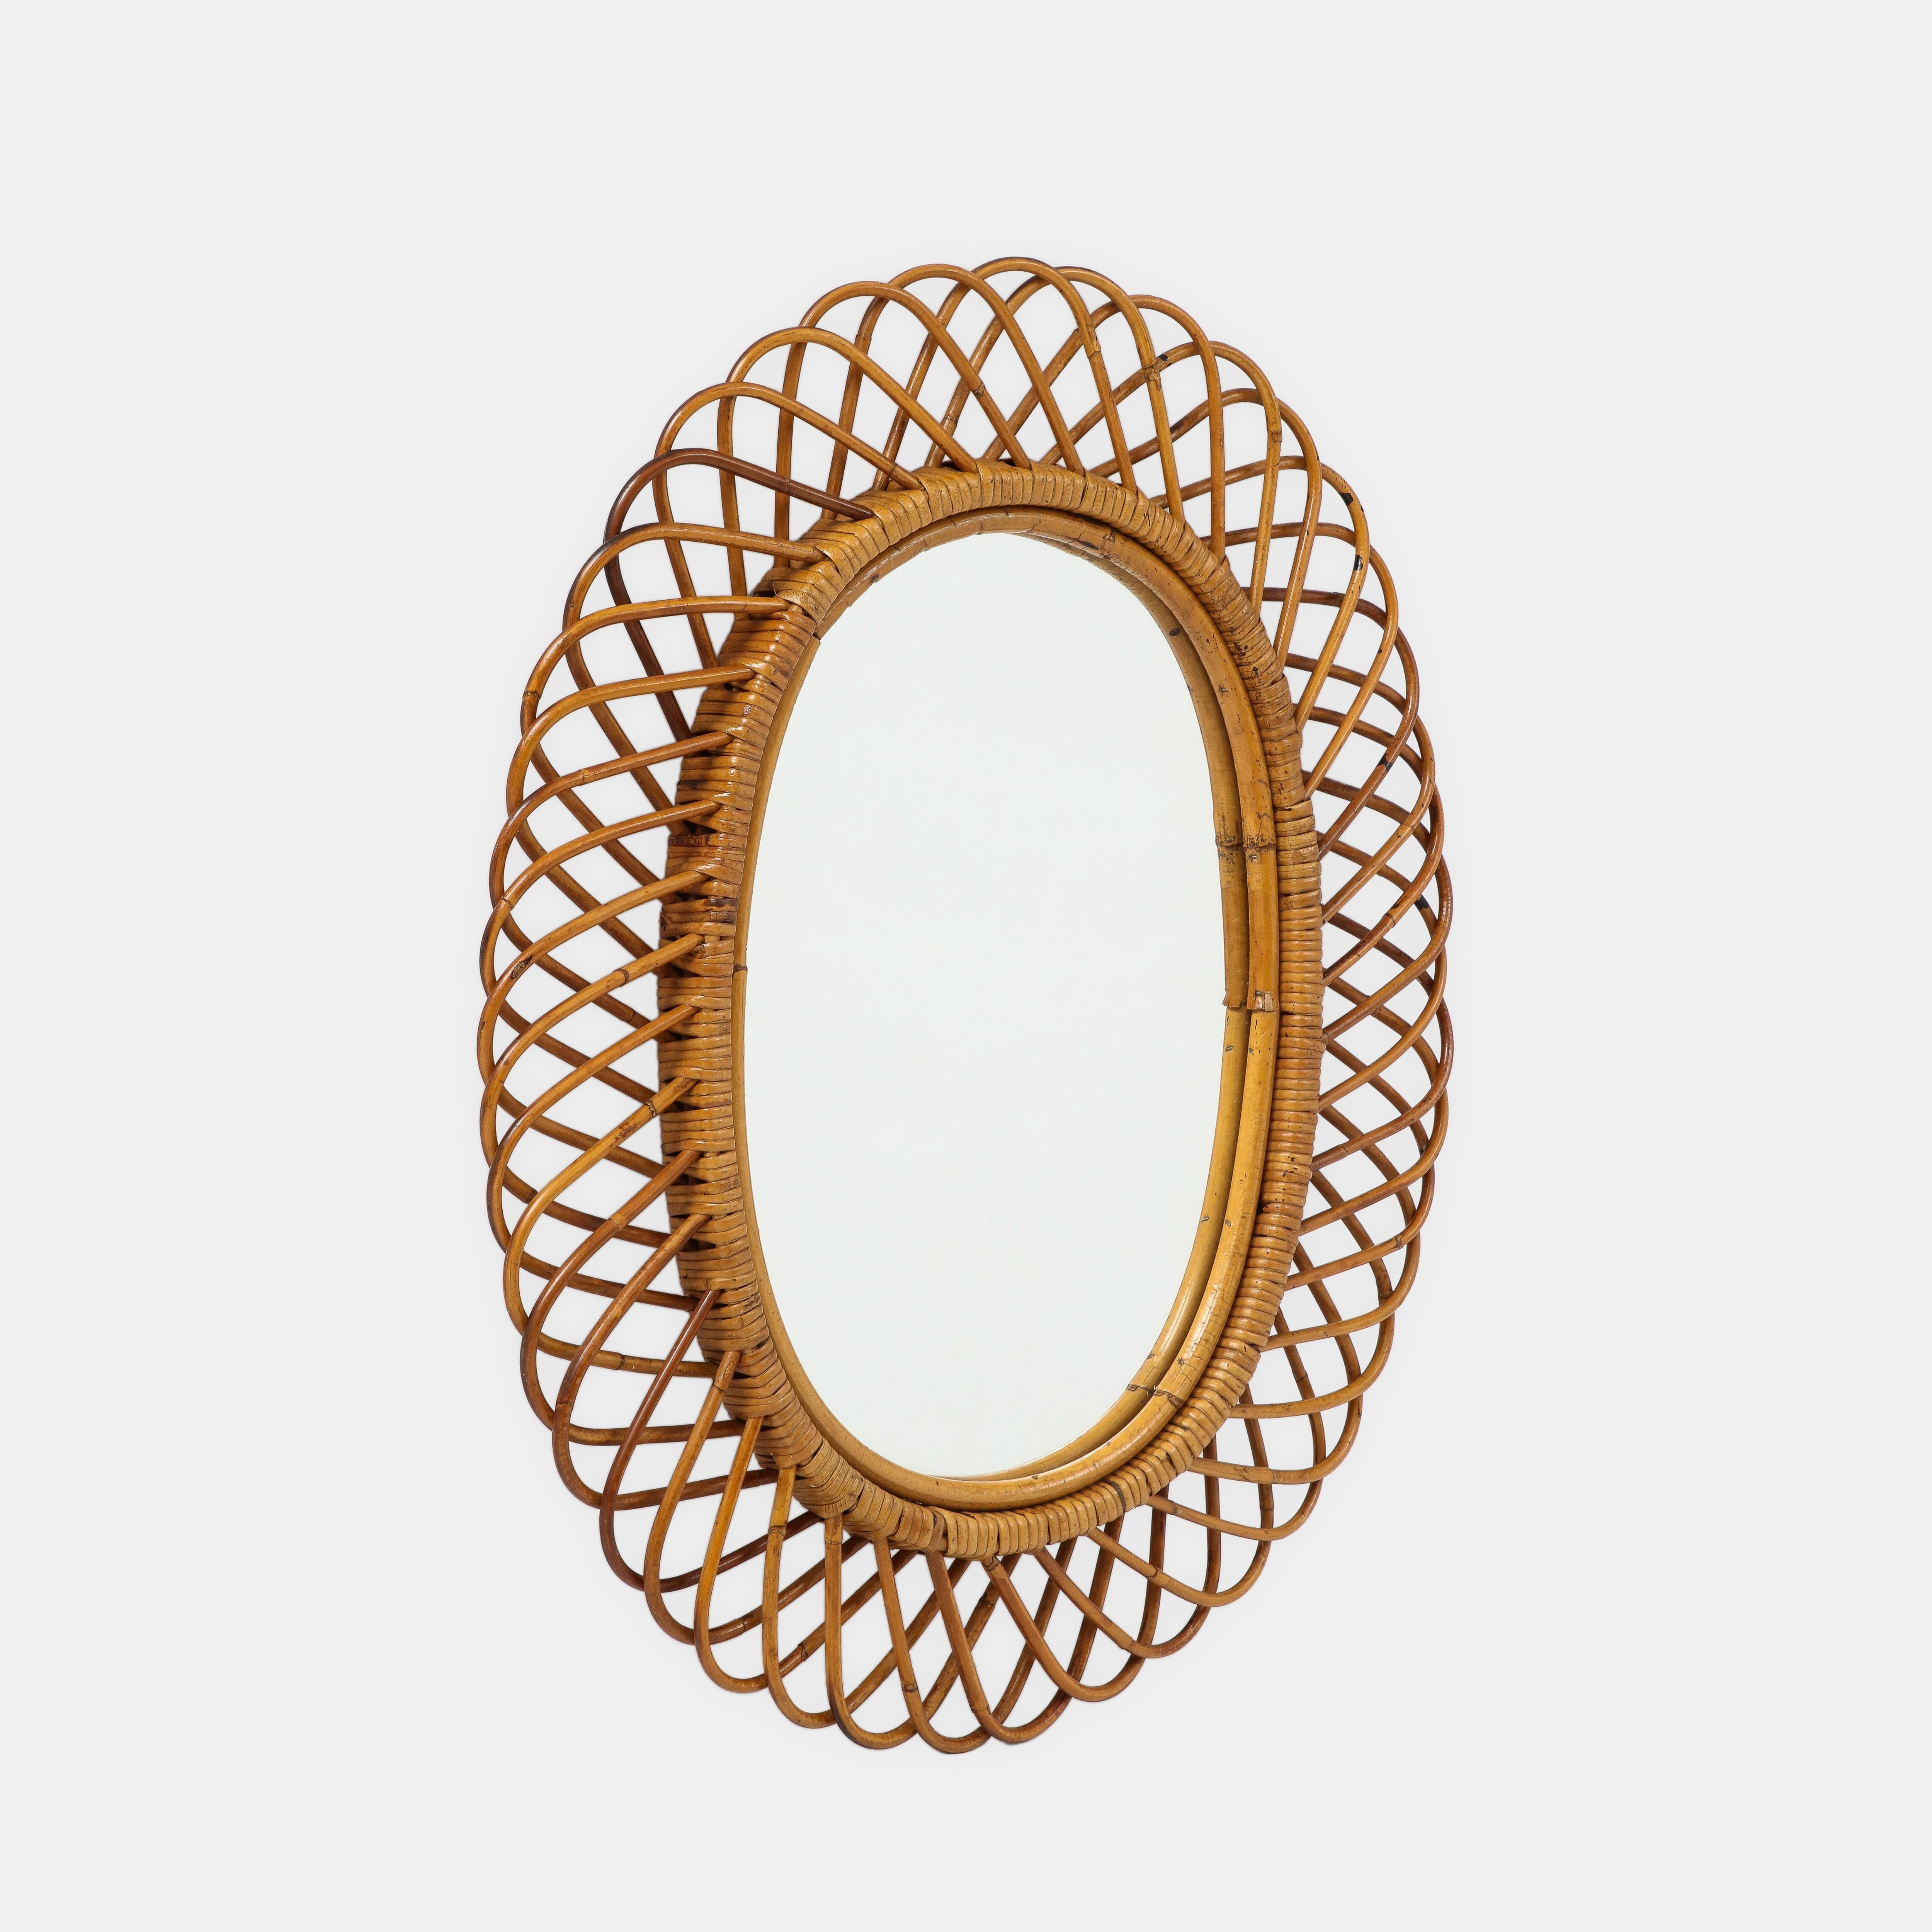 Franco Albini for Bonacina oval bamboo and rattan wall mirror, Italy, 1950s. This chic and iconic Italian mid-century mirror is intricately hand-woven with bamboo and rattan, then stained and lacquered. Original red velvet on backside of mirror.